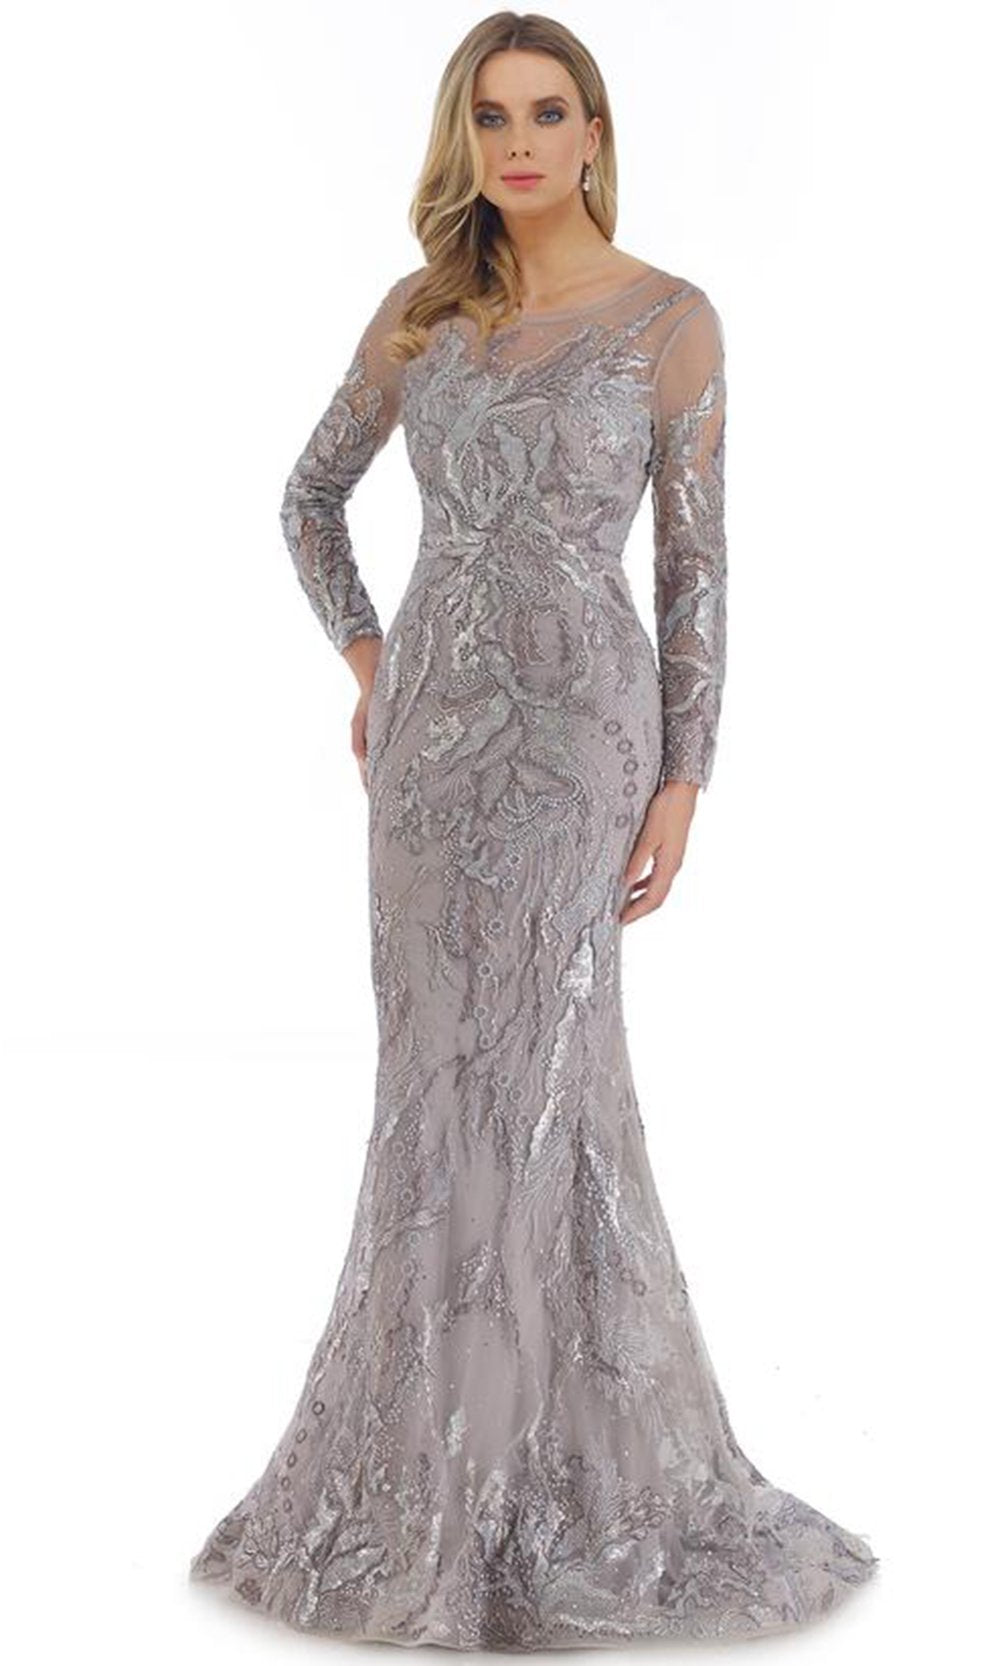 Morrell Maxie - Sheer Long Sleeve Jeweled Dress 16332 In Gray and Silver